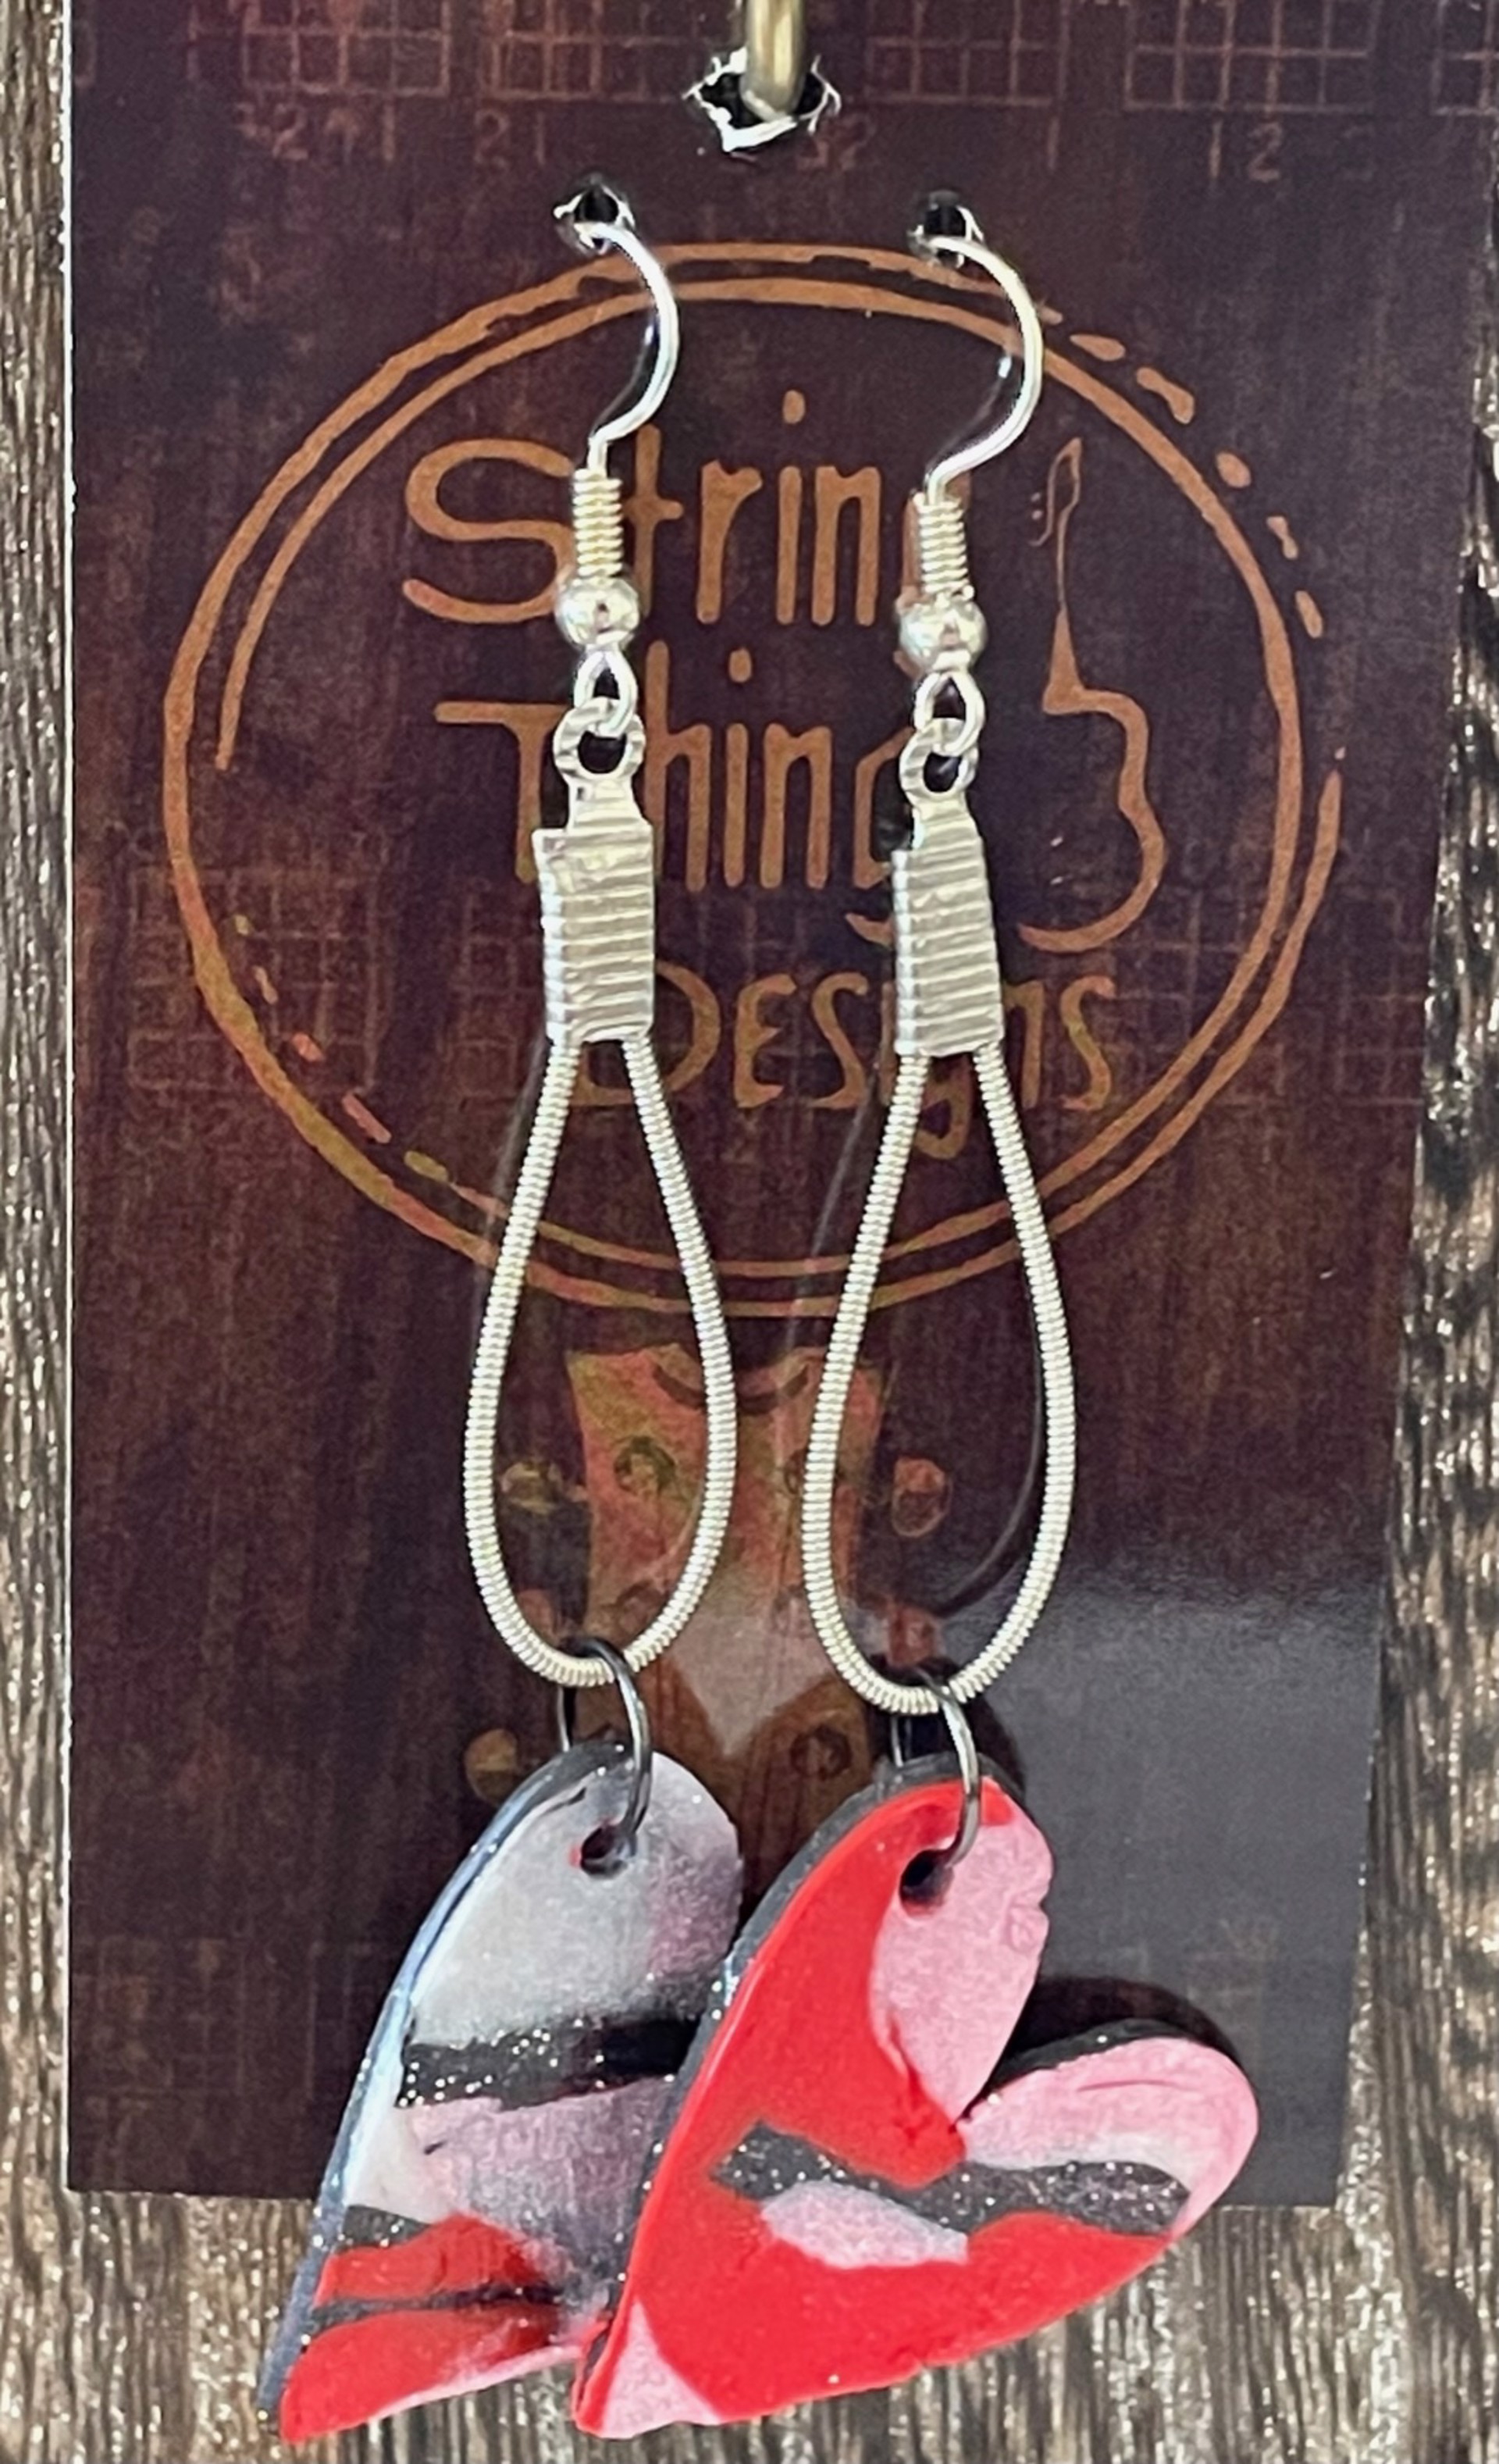 Heart Guitar String Earrings by String Thing Designs